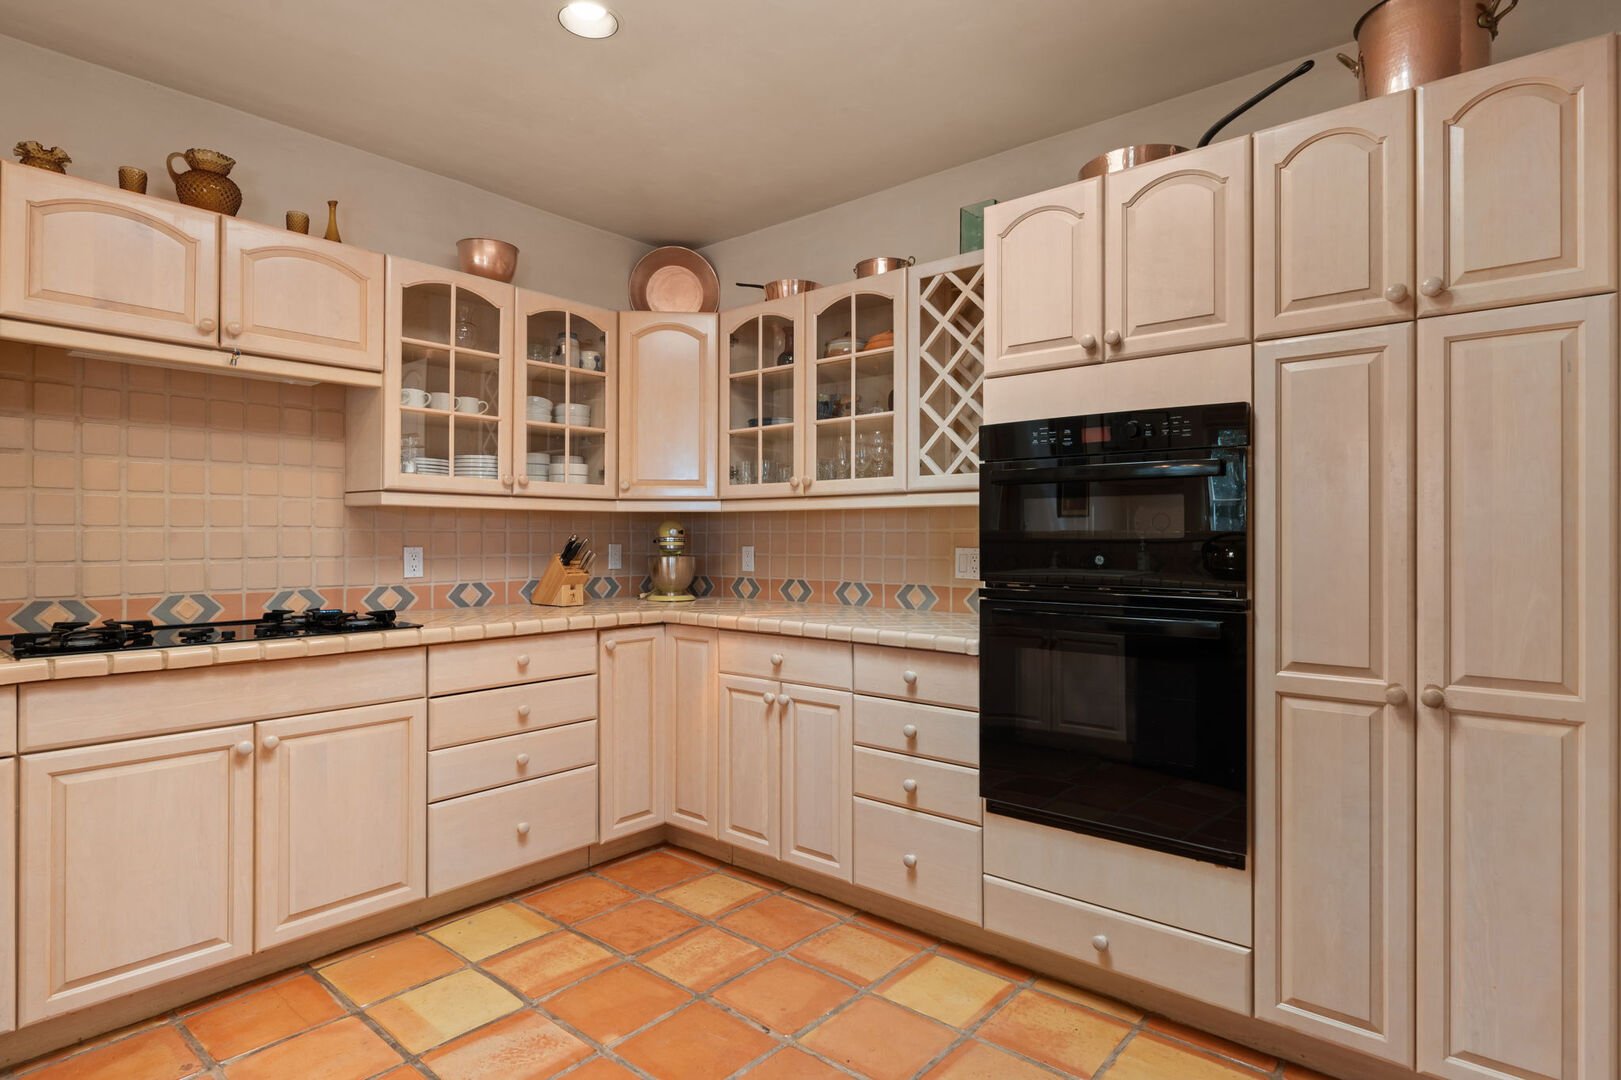 Prepare culinary delights in the well-equipped kitchen boasting ample counter space, a wine rack, built-in appliances, and a variety of kitchen essentials for your convenience.